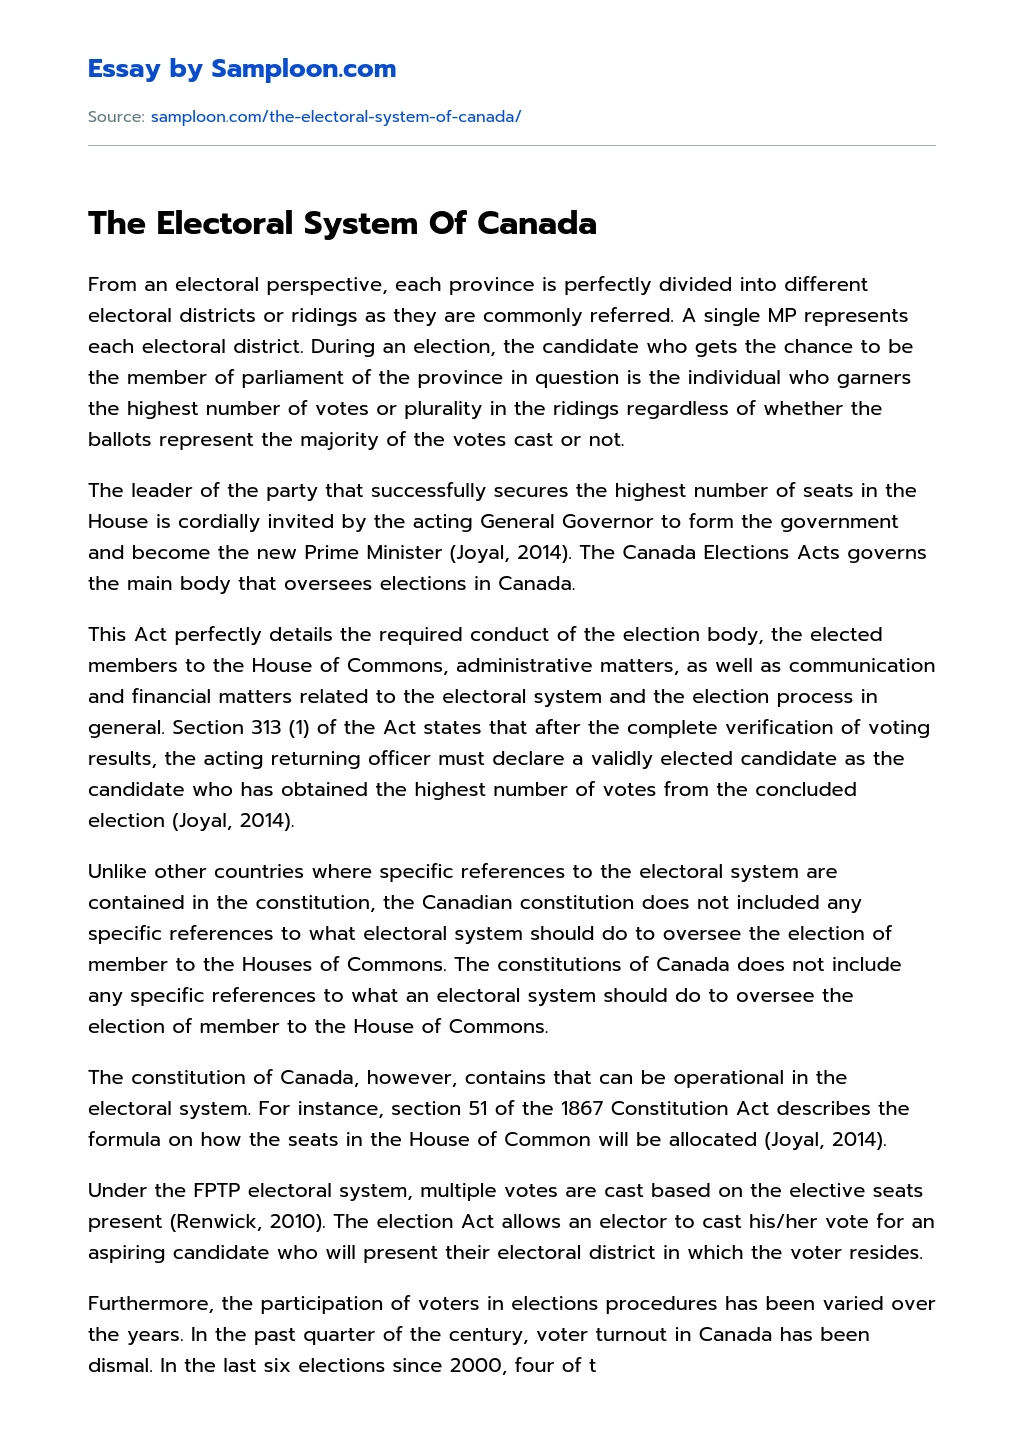 The Electoral System Of Canada essay